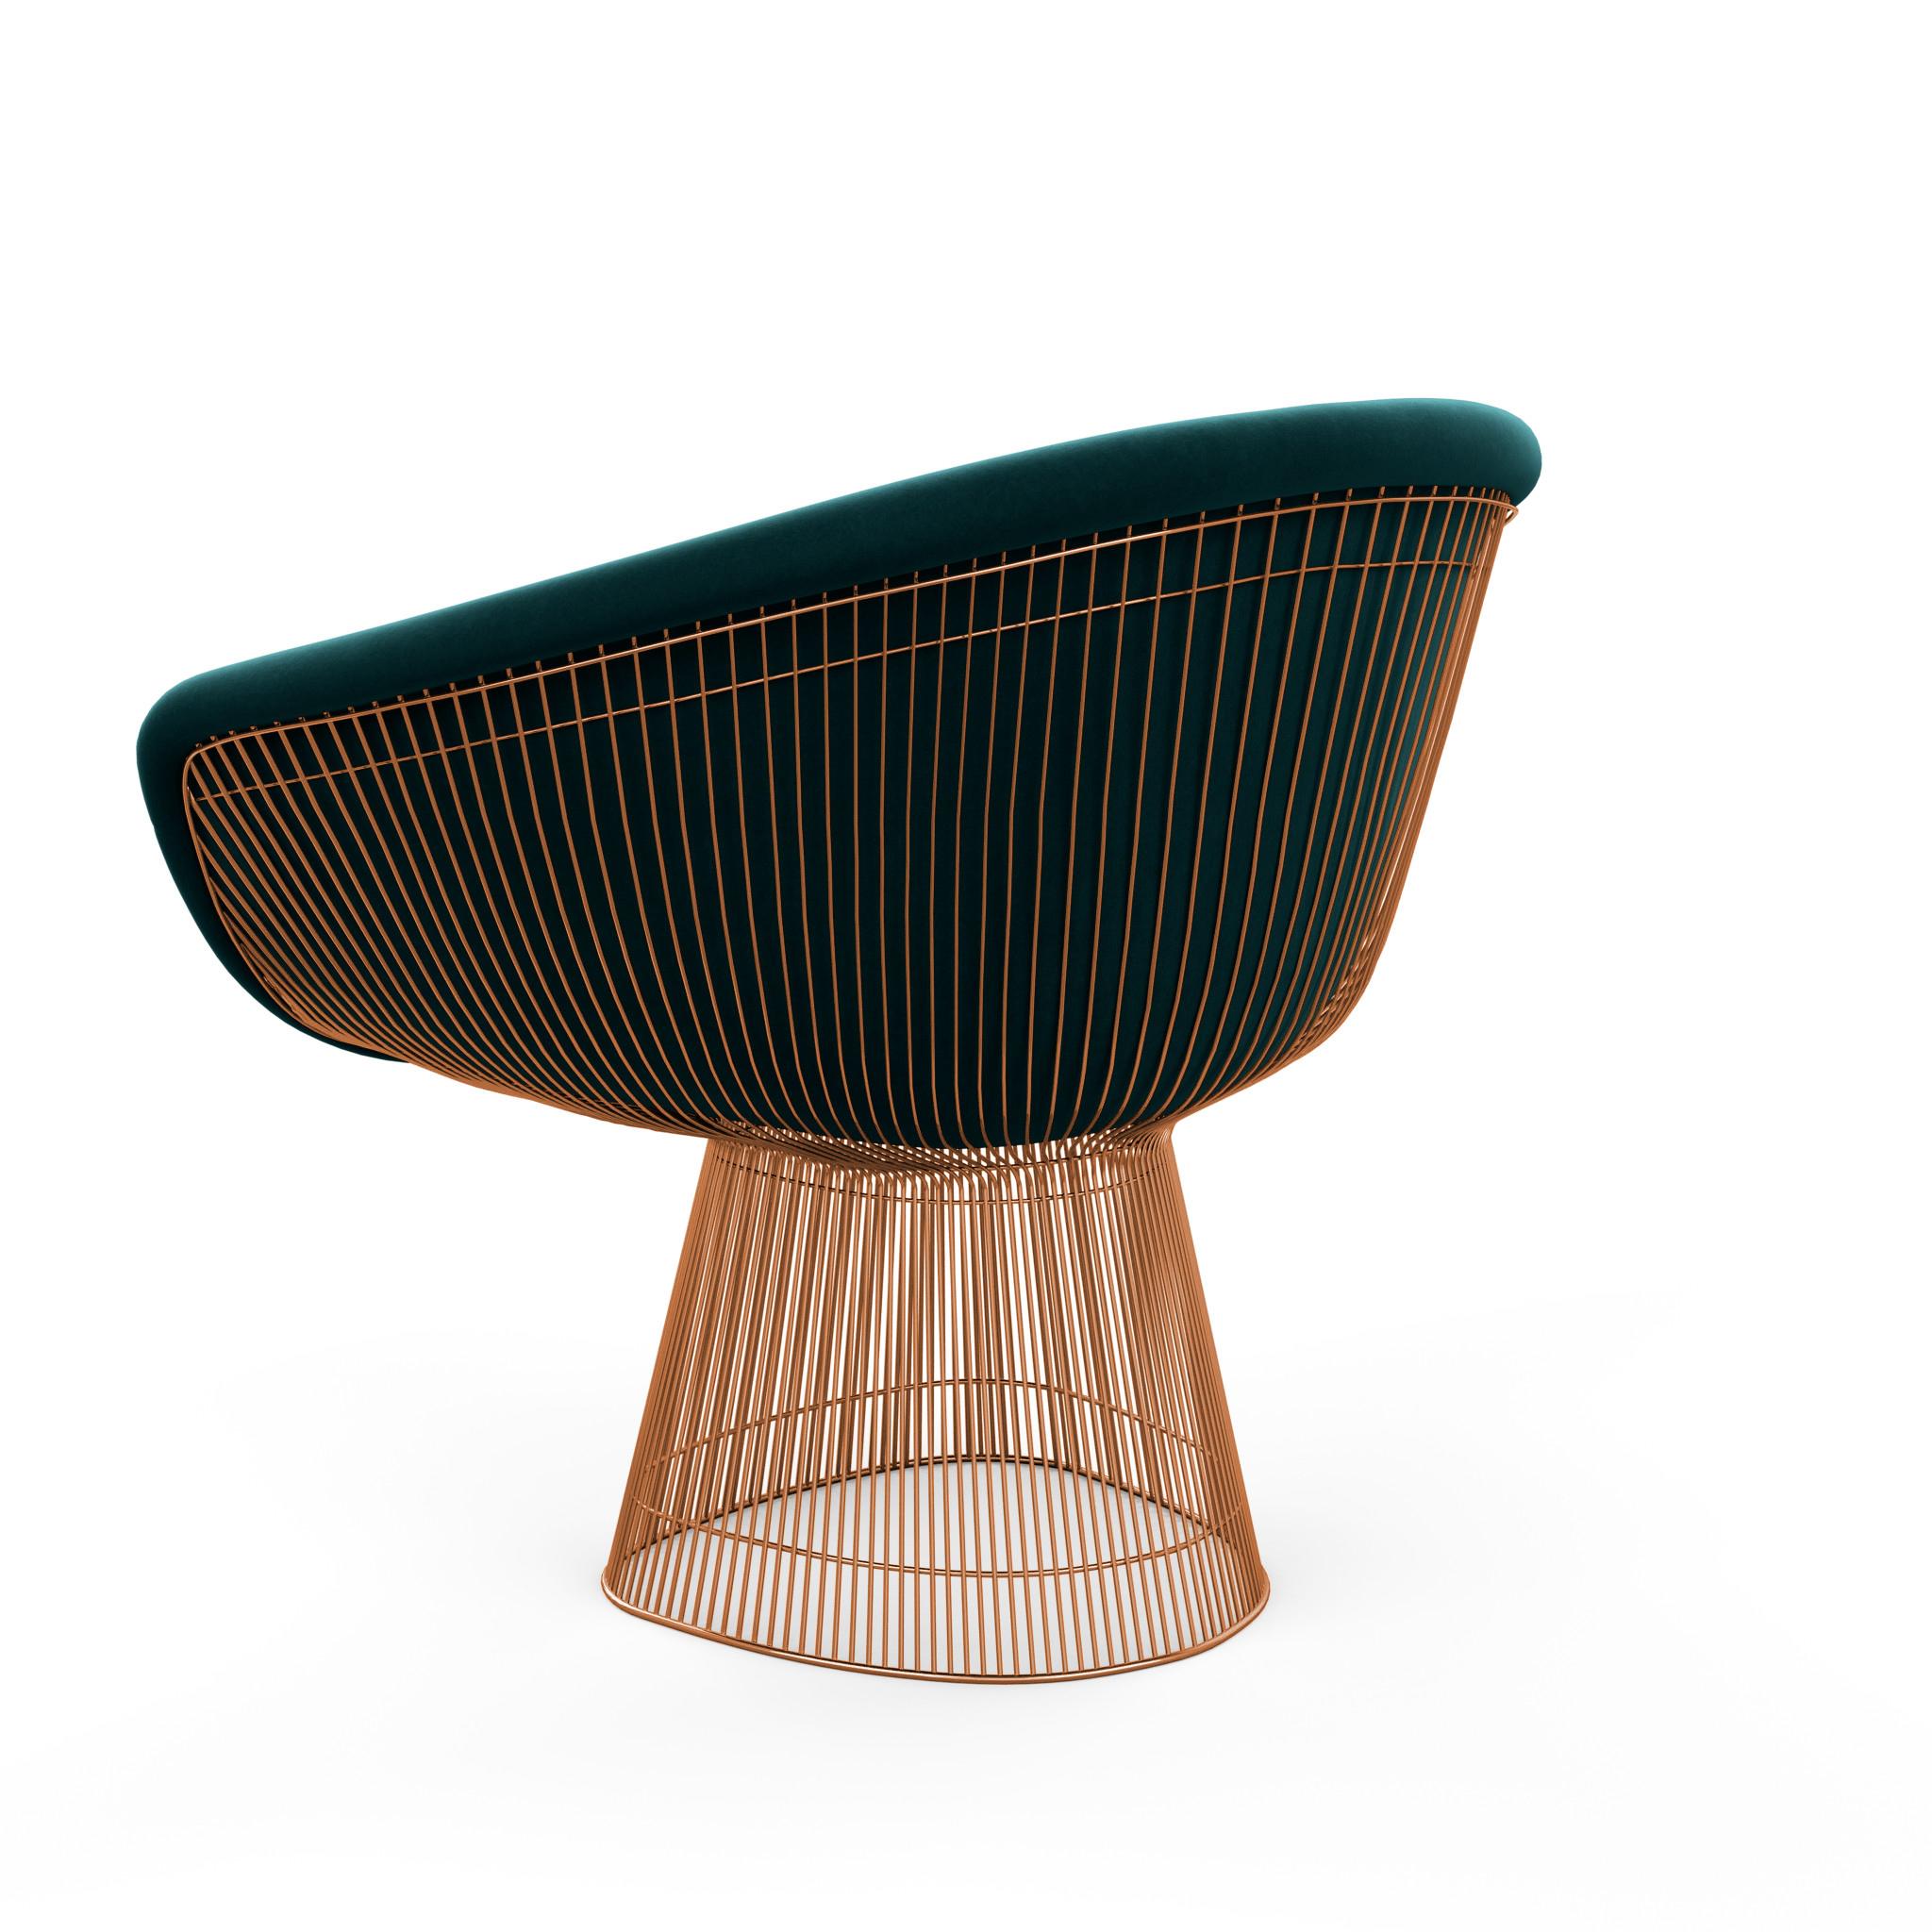 In 1966, the Platner Collection captured the “decorative, gentle, graceful” shapes that were beginning to infiltrate the modern vocabulary. The iconic lounge chair is created by welding curved steel rods to circular and semi-circular frames,